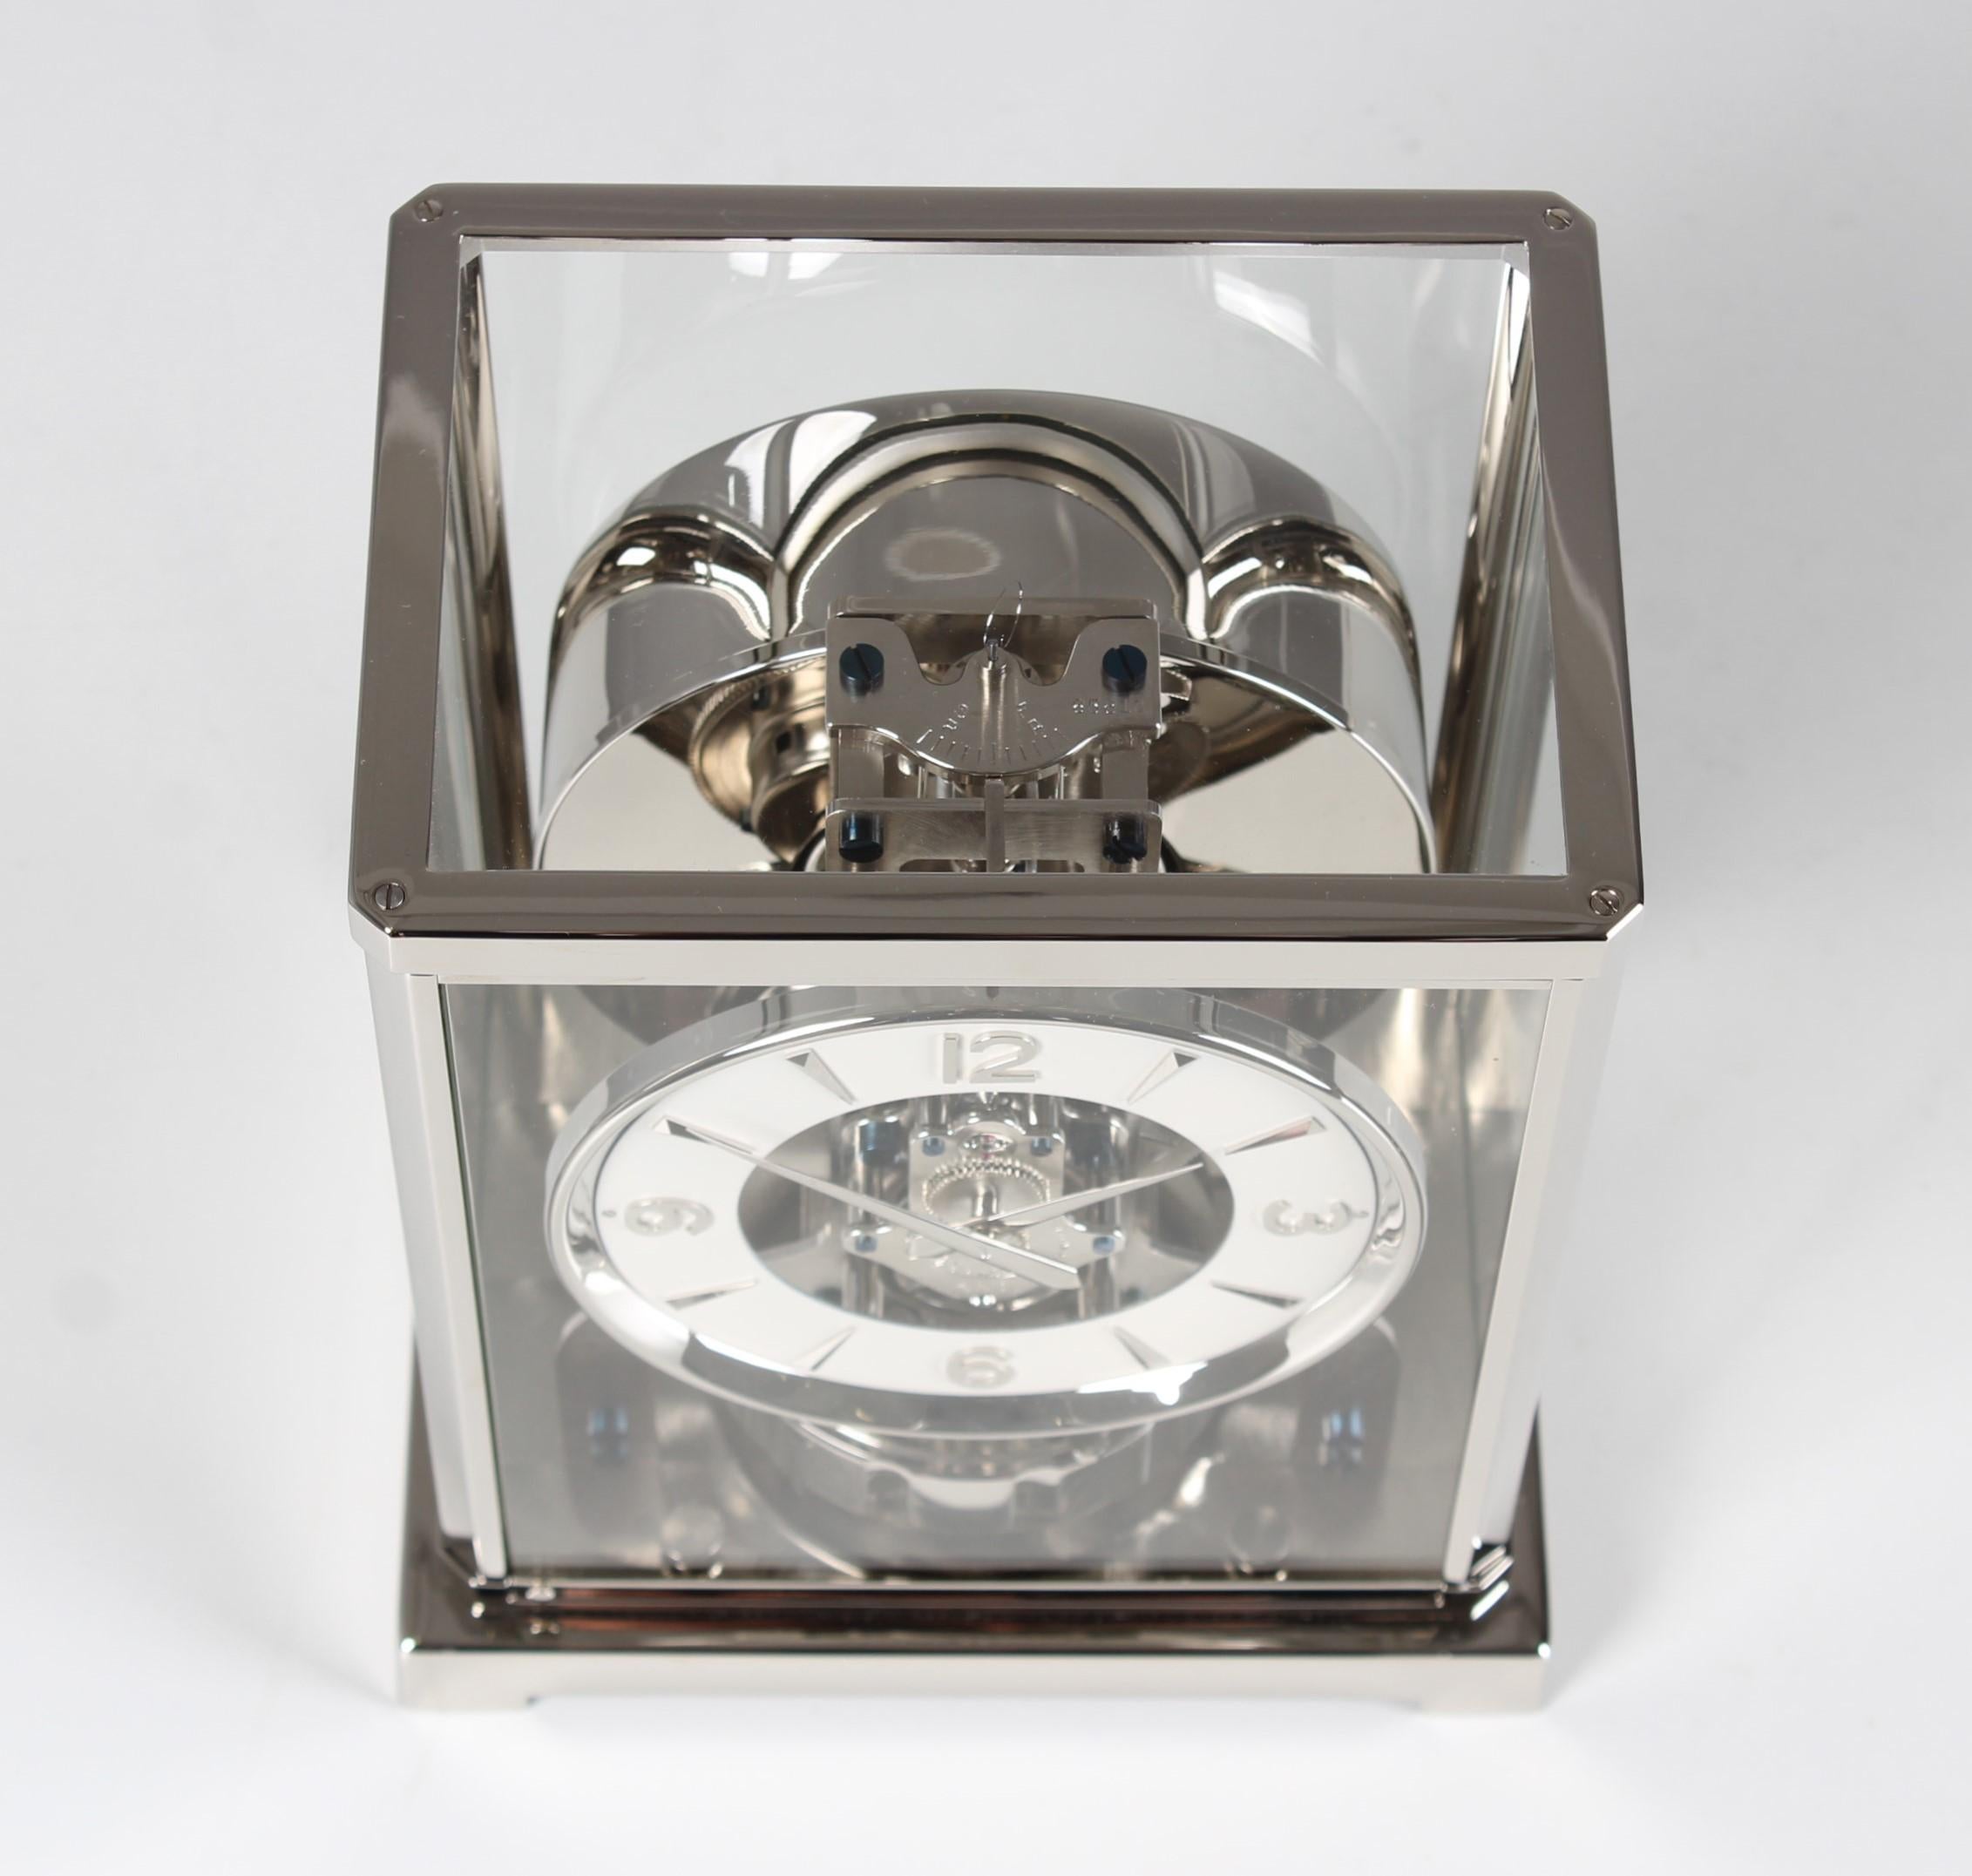 Jaeger LeCoultre, Silver Atmos Clock from 1955, Revised and New Nickel-Plated For Sale 4